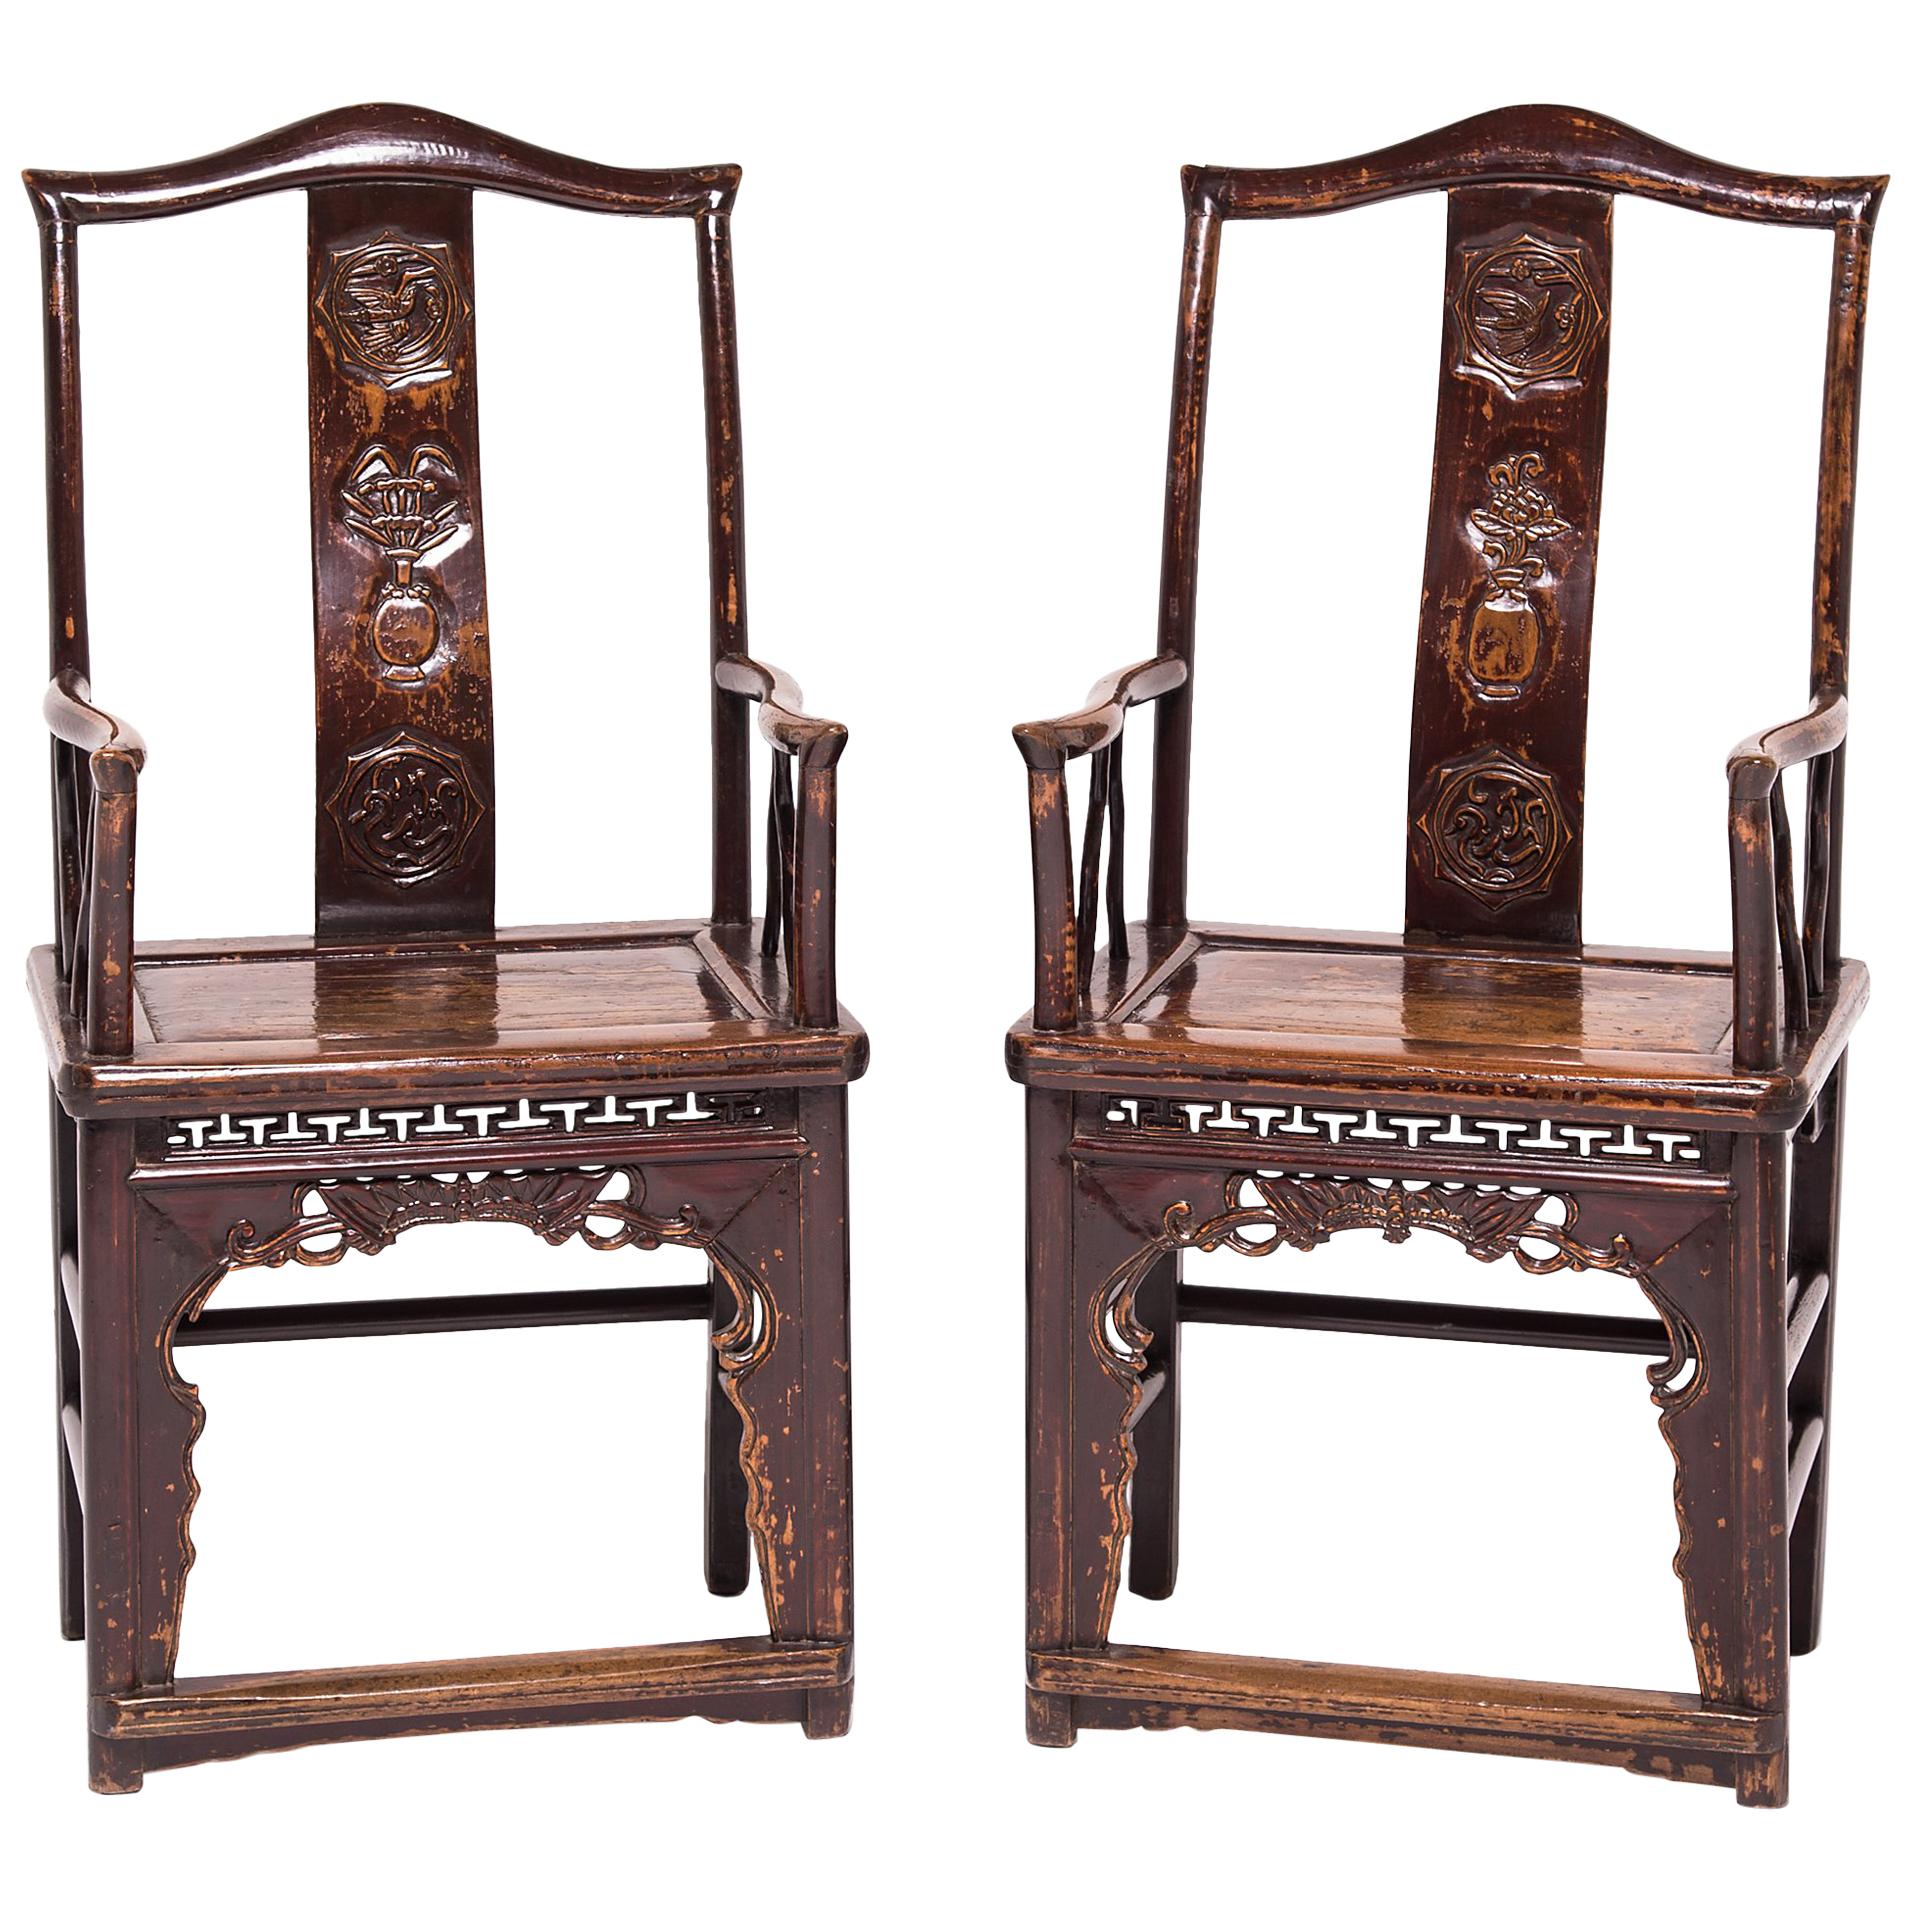 Pair of Chinese Southern Administrator's Chairs, c. 1850